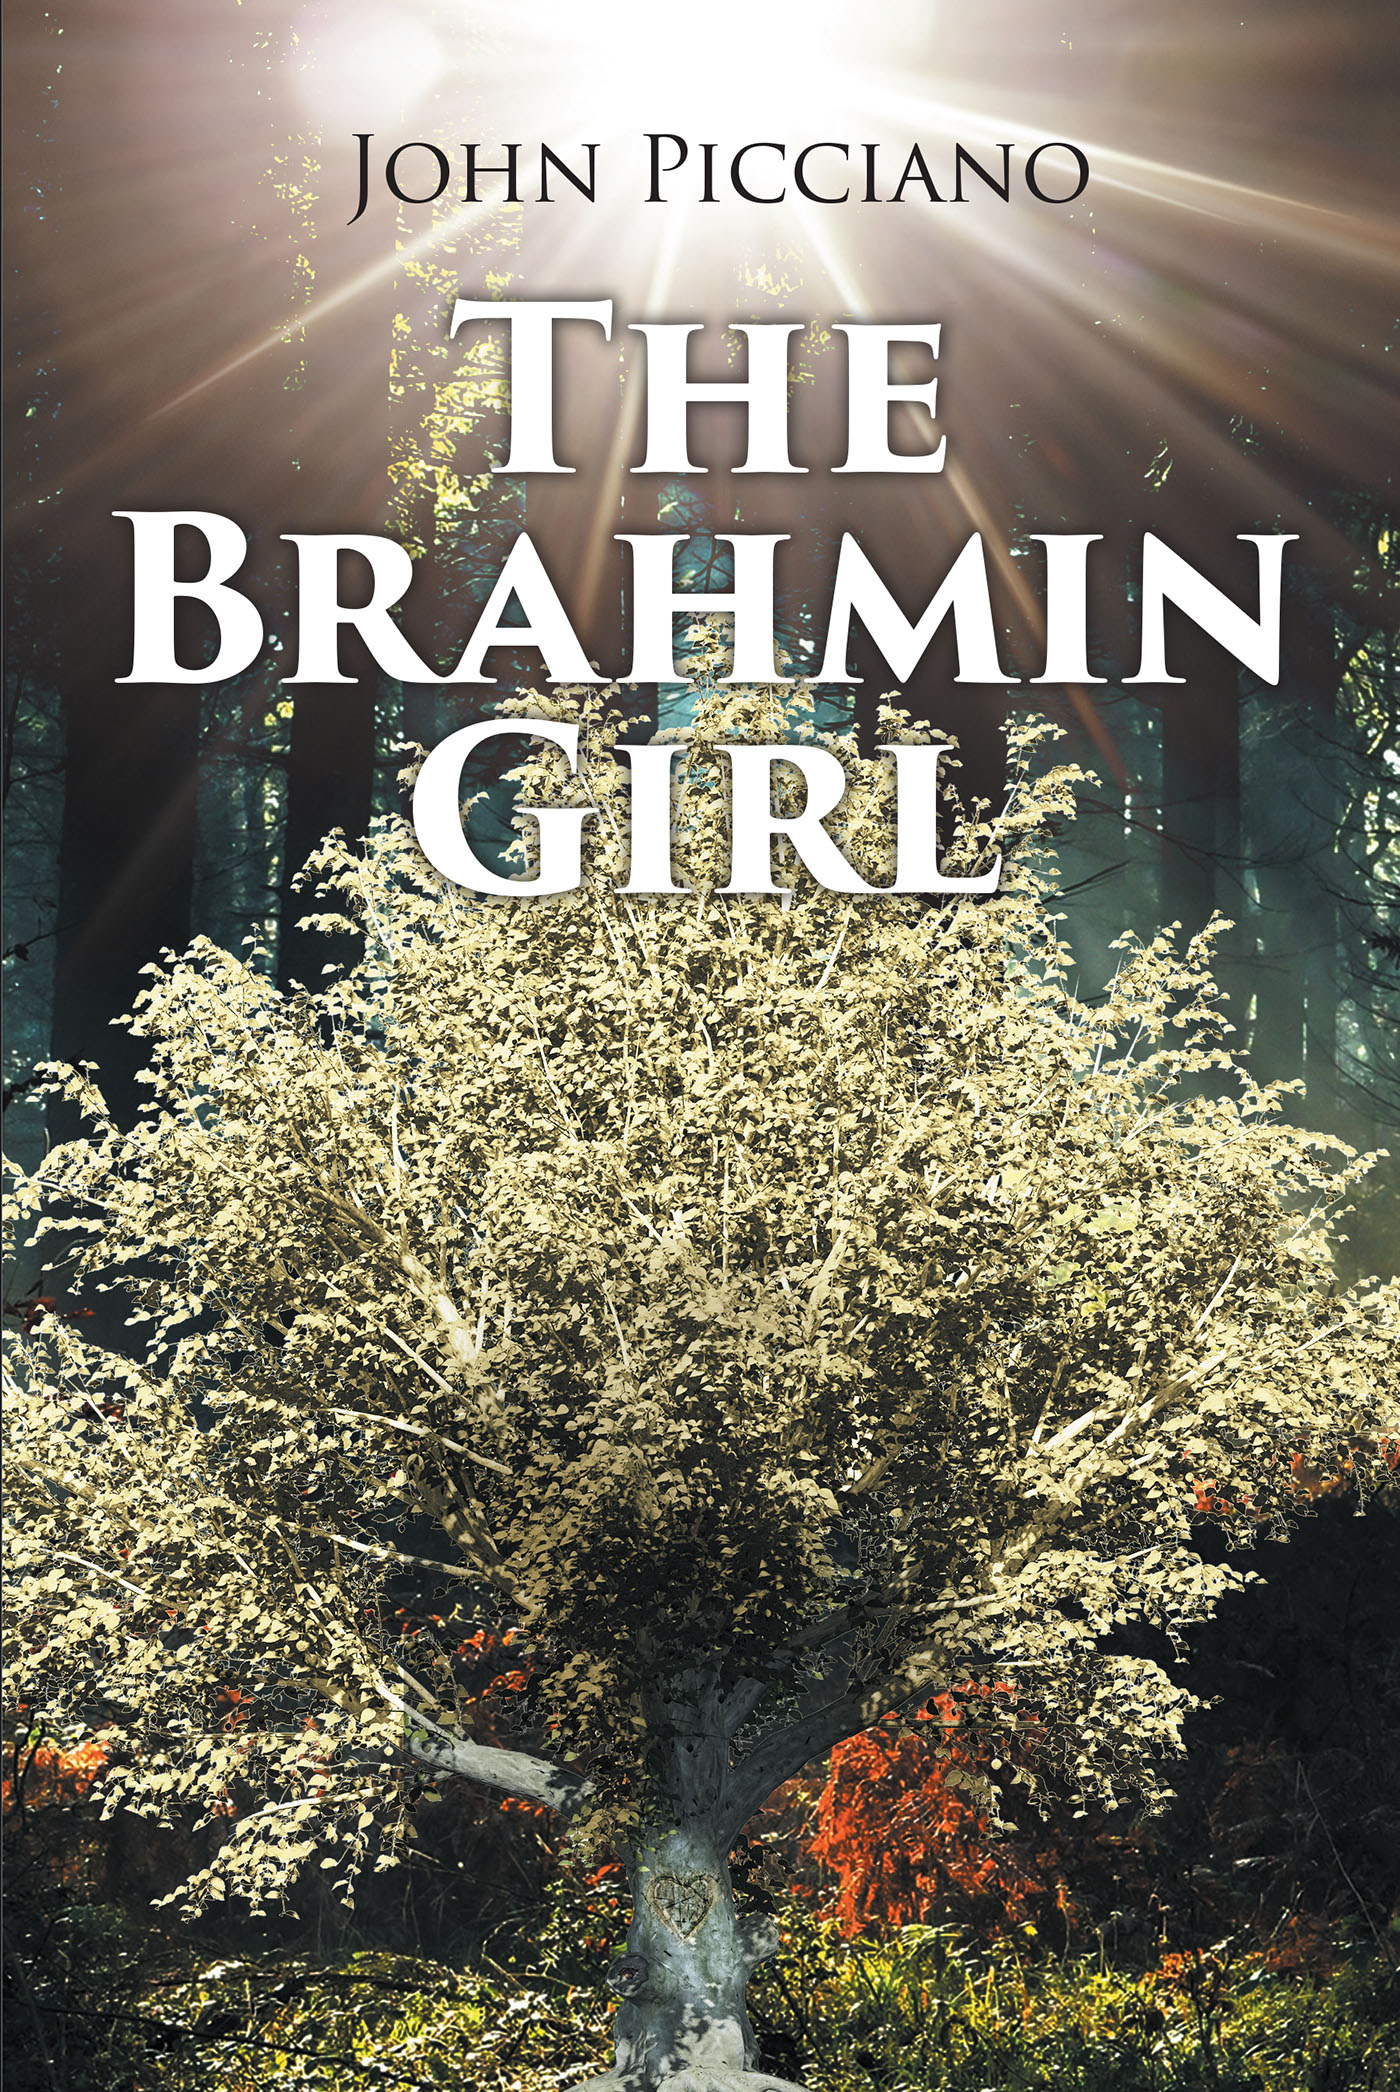 Author John Picciano’s New Book, "The Brahmin Girl," is a Fascinating Tale of Two Murders Set Forty-Five Years Apart, Yet Intrinsically Linked by the Latter Victim